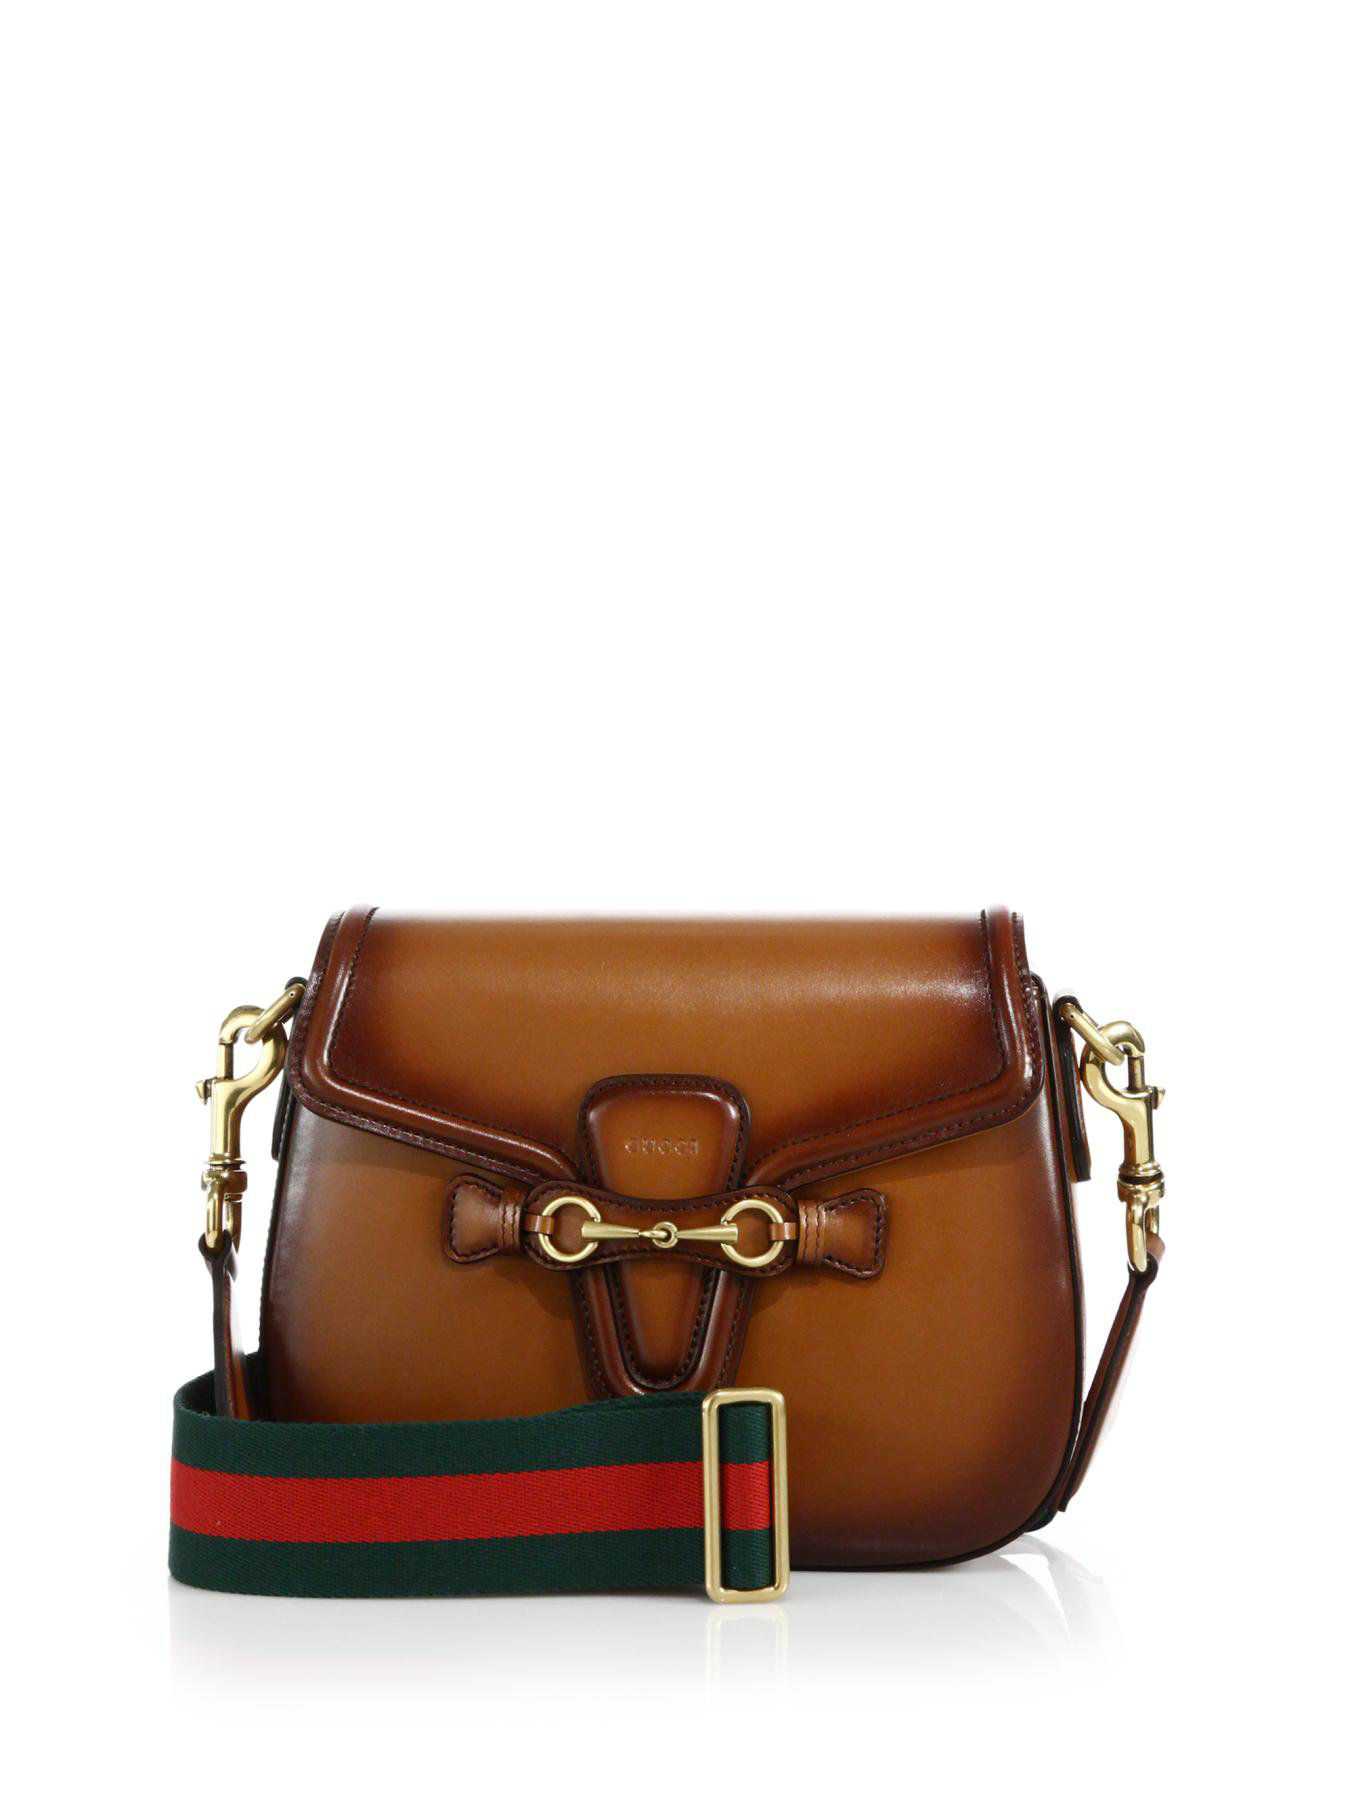 Lyst - Gucci Lady Web Hand-Stained Leather Shoulder Bag in Brown